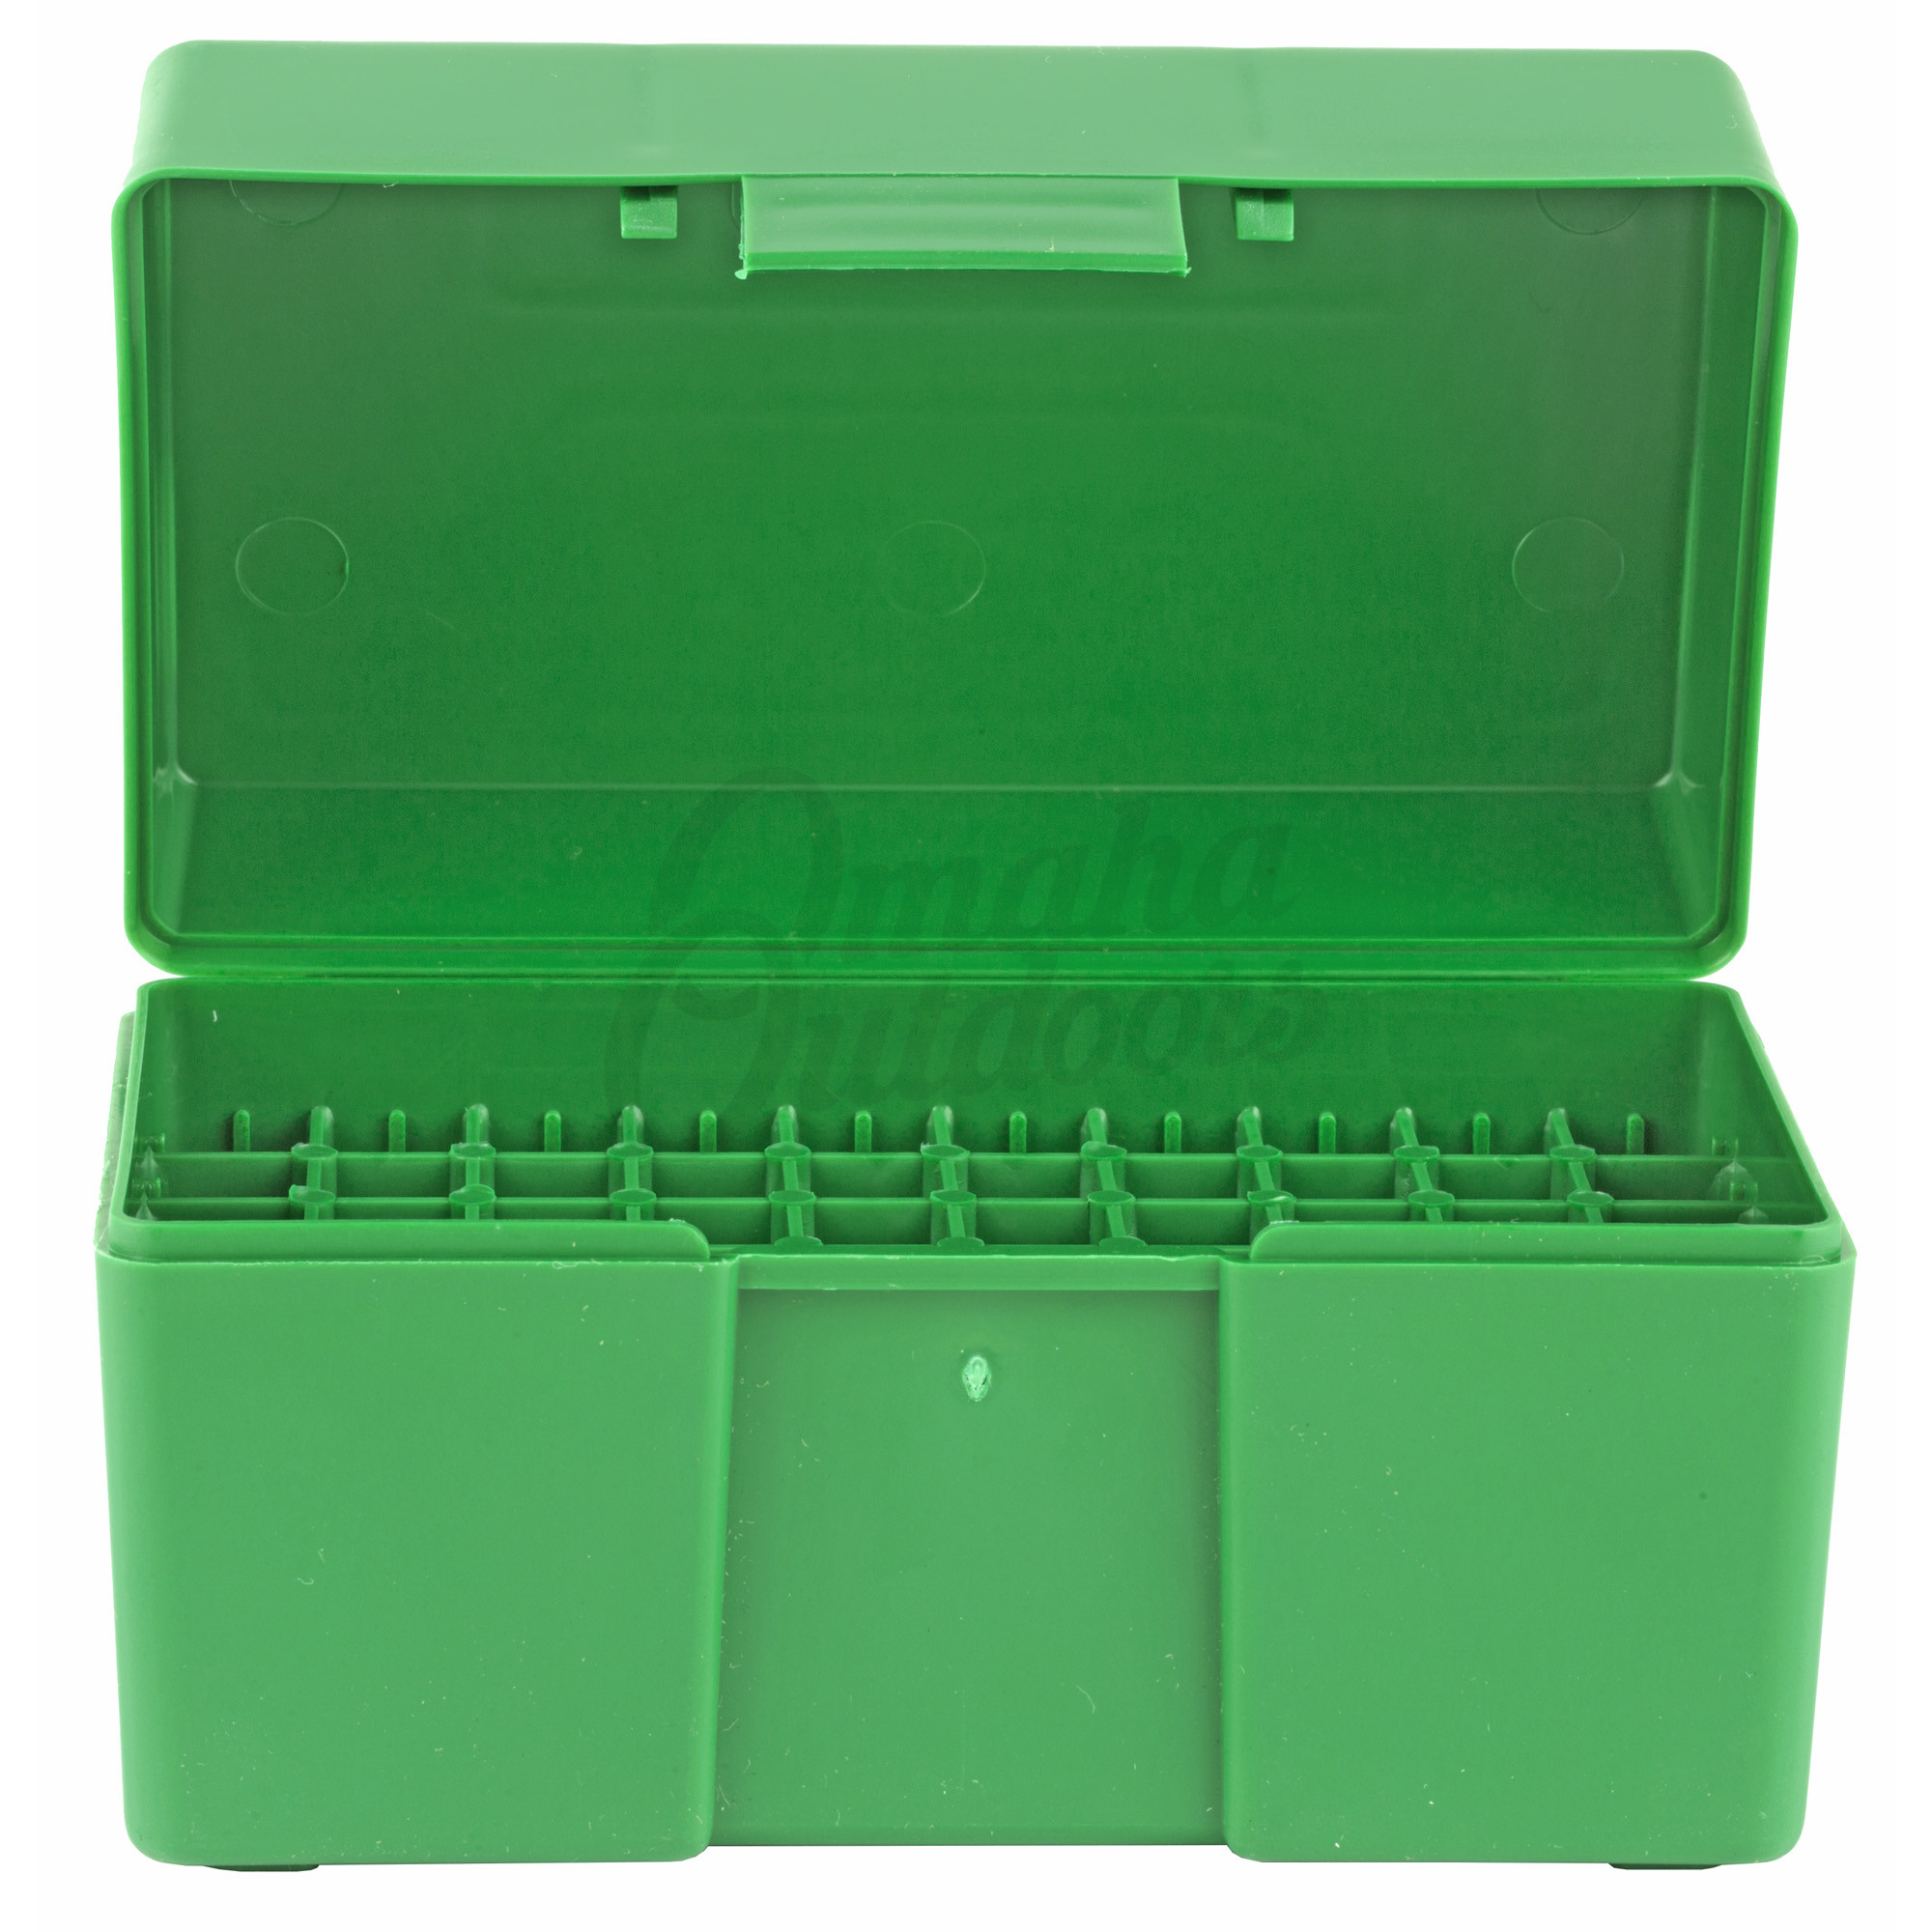 RCBS RCBS Ammo Box For Small Rifle Green Plastic 86901 